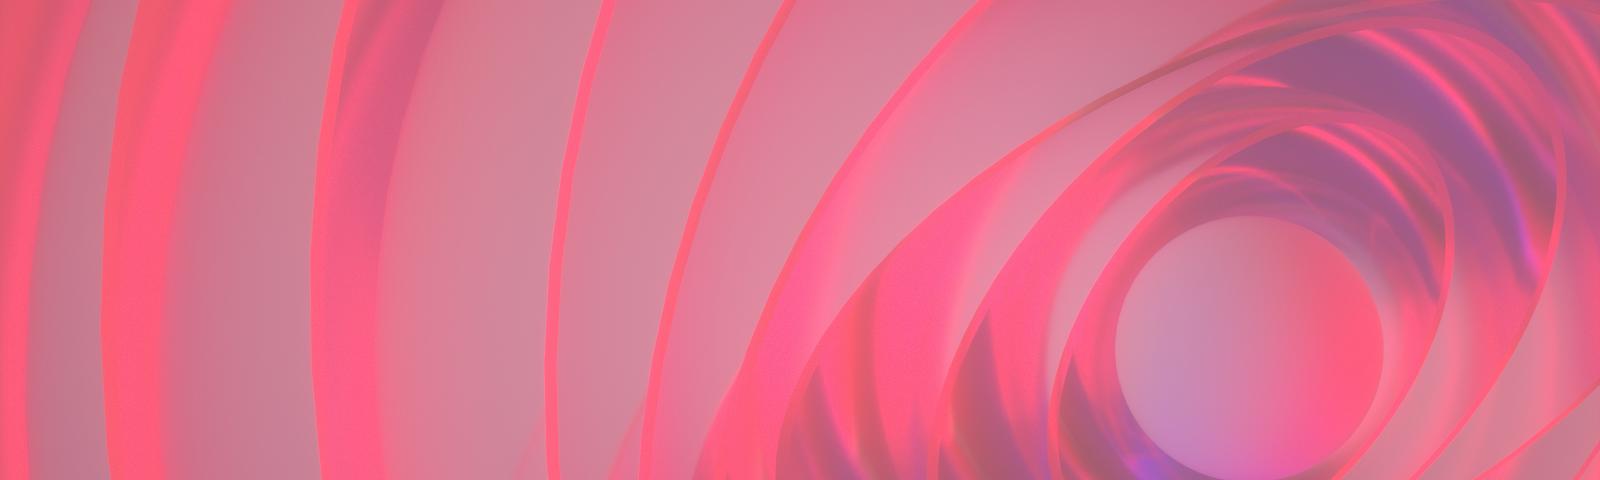 Abstract image of a tunnel-like lens, colored in pink tones.